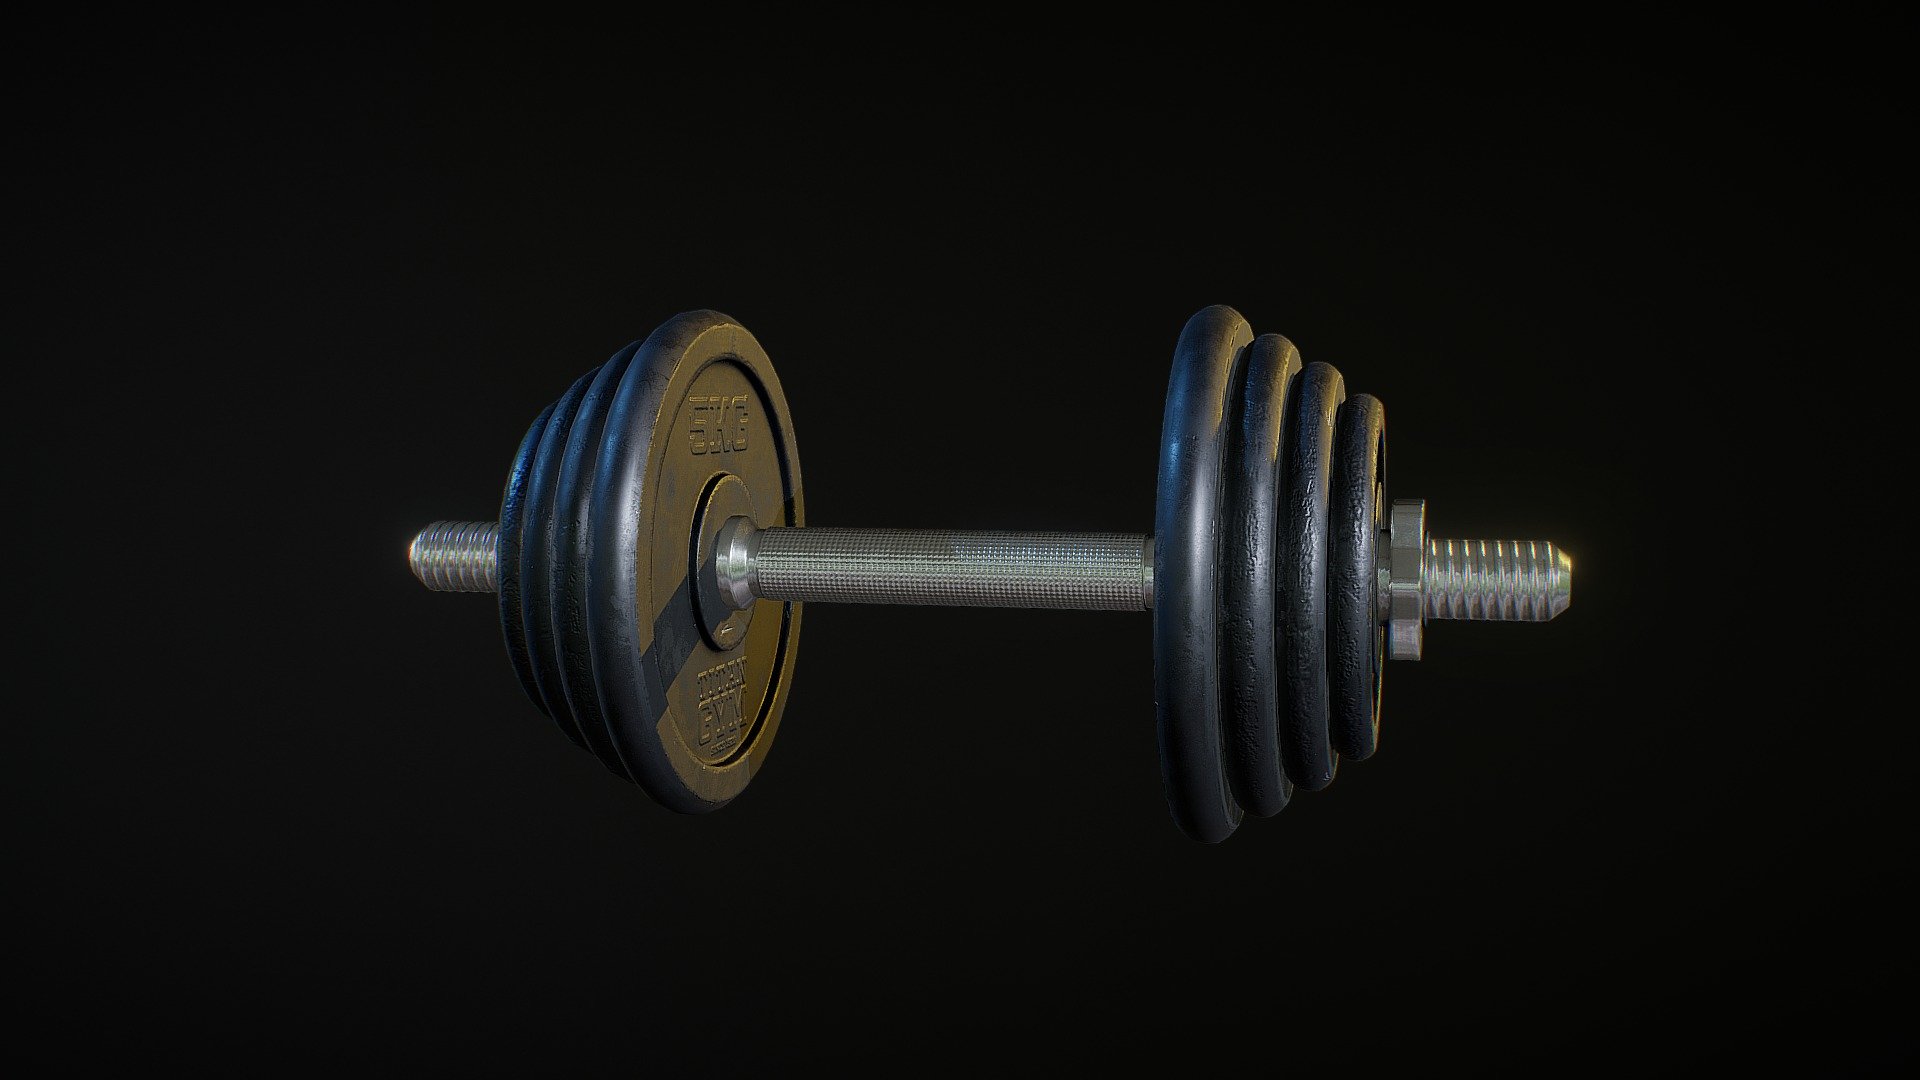 Adjustable Dumbbells low-poly 3d model ready for Virtual Reality (VR), Augmented Reality (AR), games and other real-time apps.



A simple low-poly dumbbell model.



Mesh formats: fbx, obj, 3ds 

Texture formats: tga, jpg 

Texture resolutions: 512, 1024, 2048 

Texture presets: UE4, Unity, Unpacked
 - Adjustable Dumbbells - Buy Royalty Free 3D model by Max Ocklze (@maxocklze) 3d model